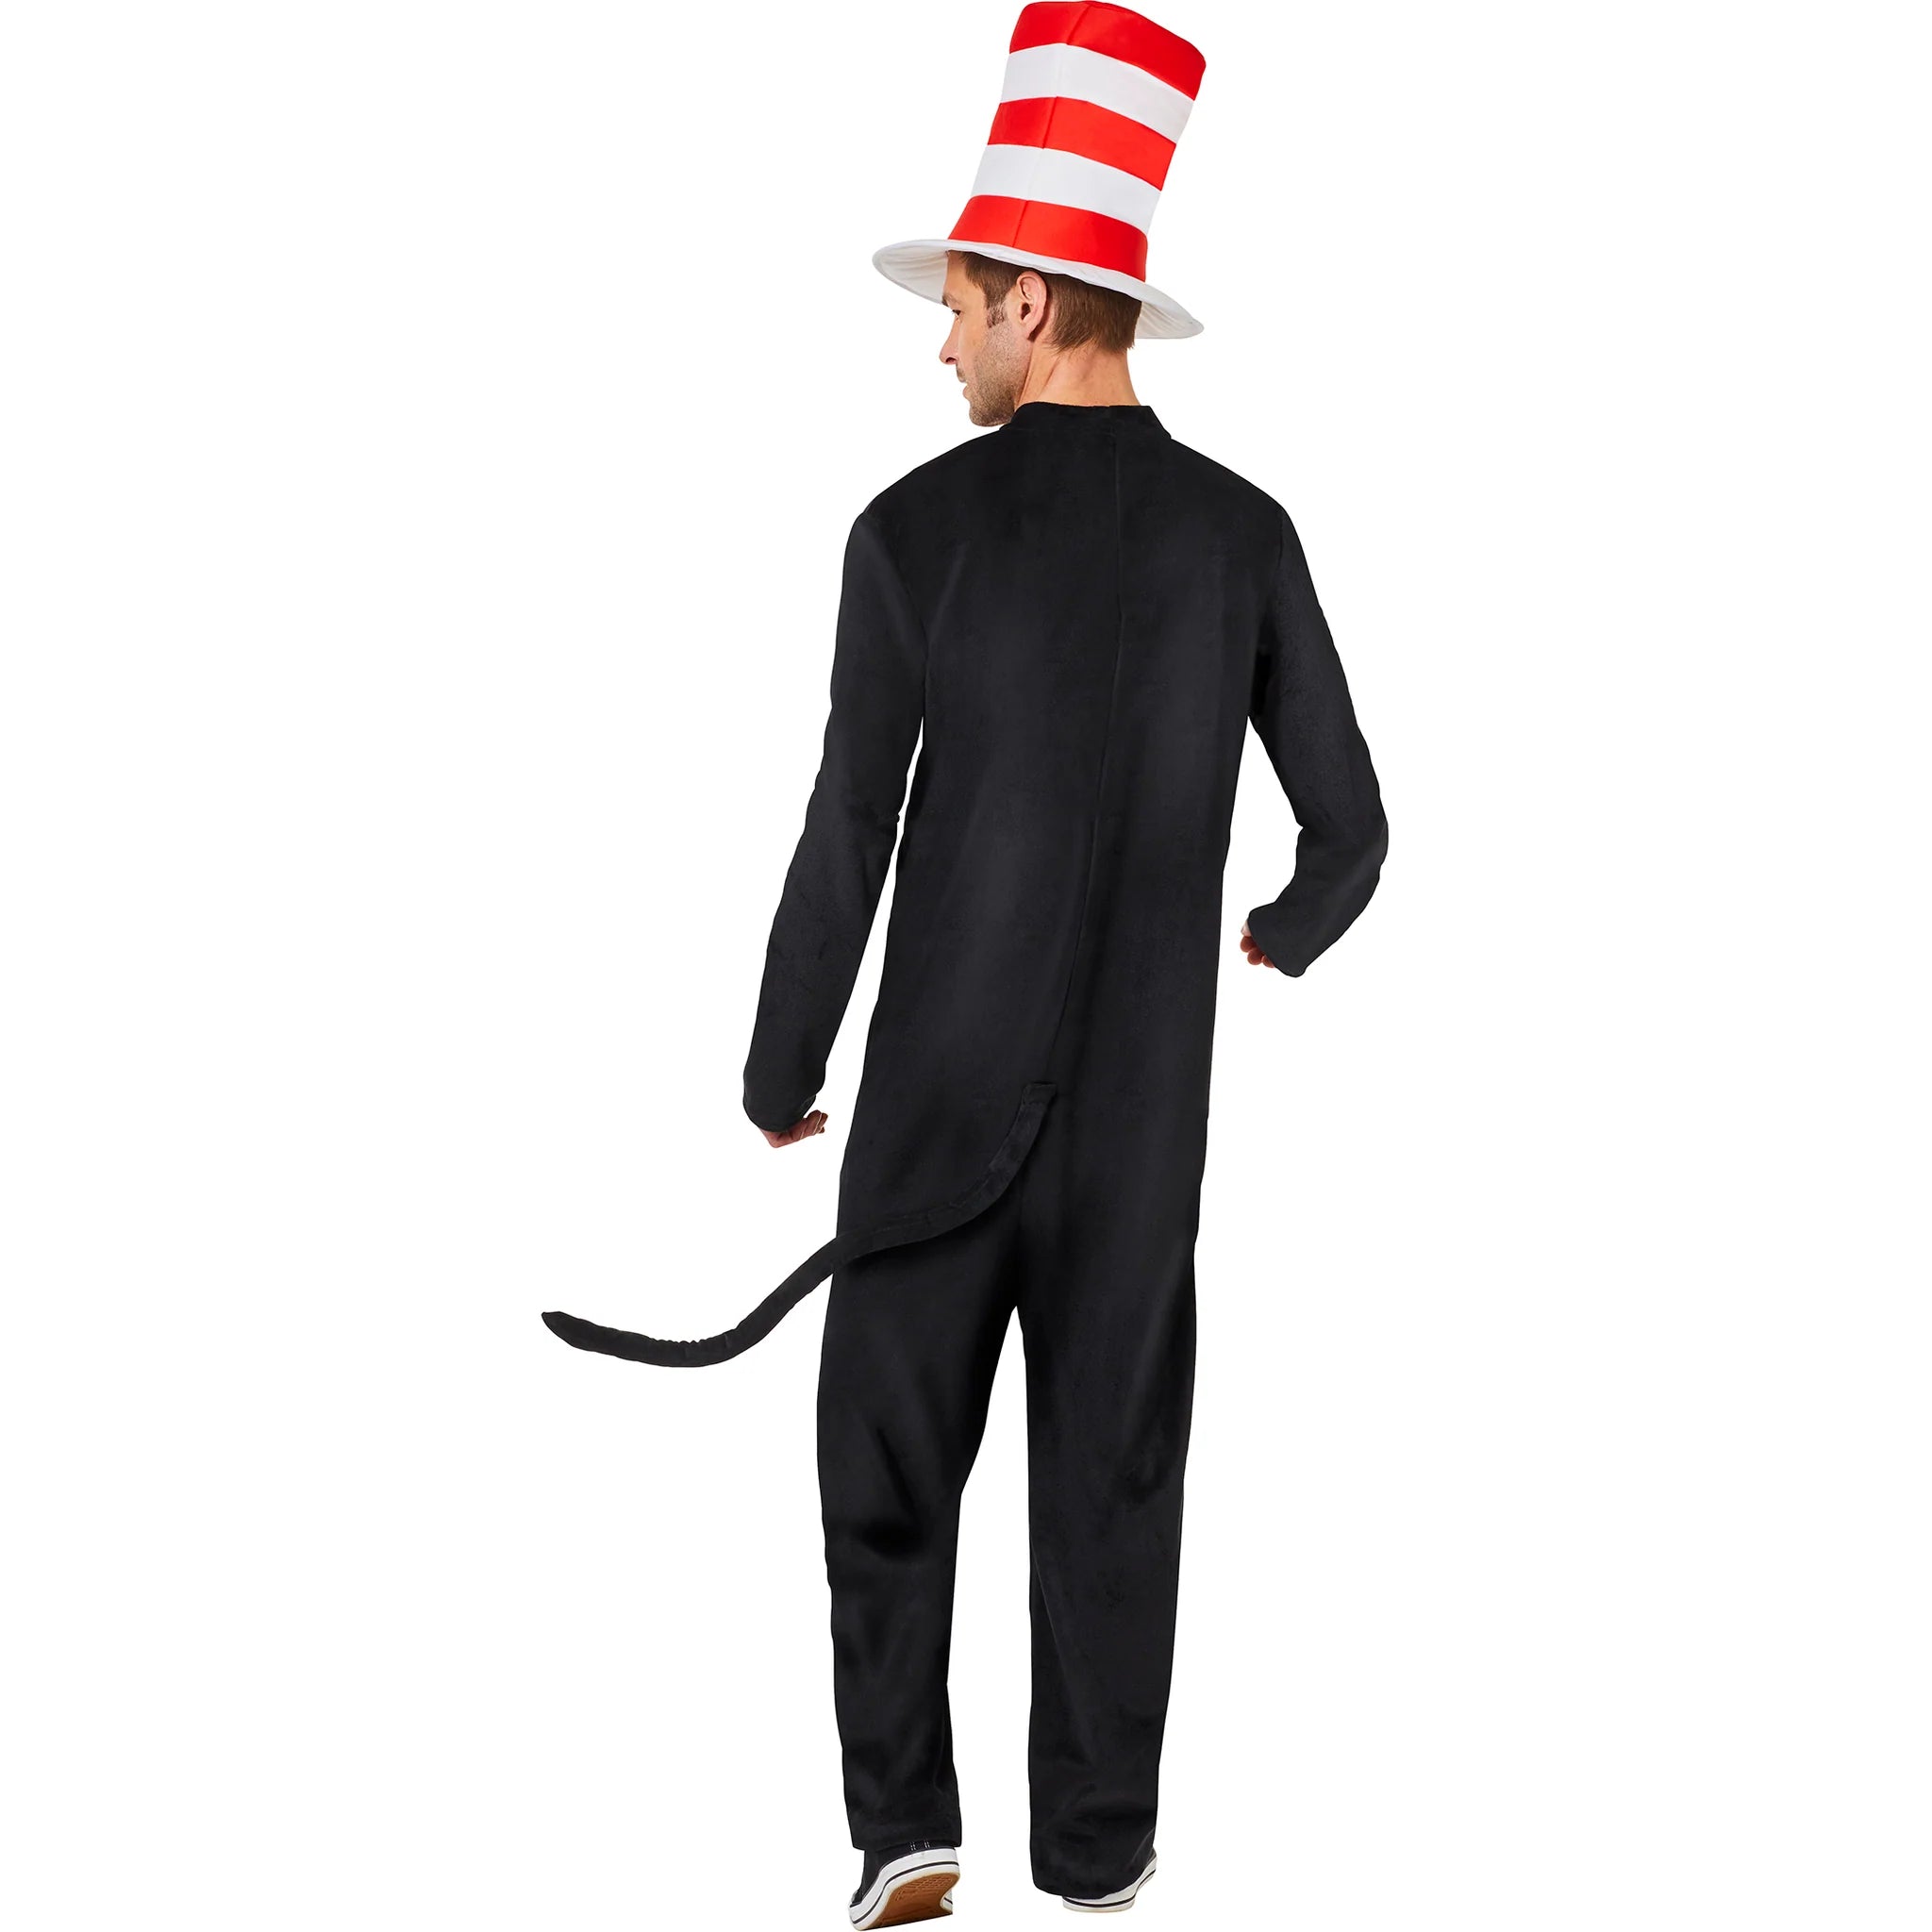 Dr. Suess The Cat In The Hat Adult Costume